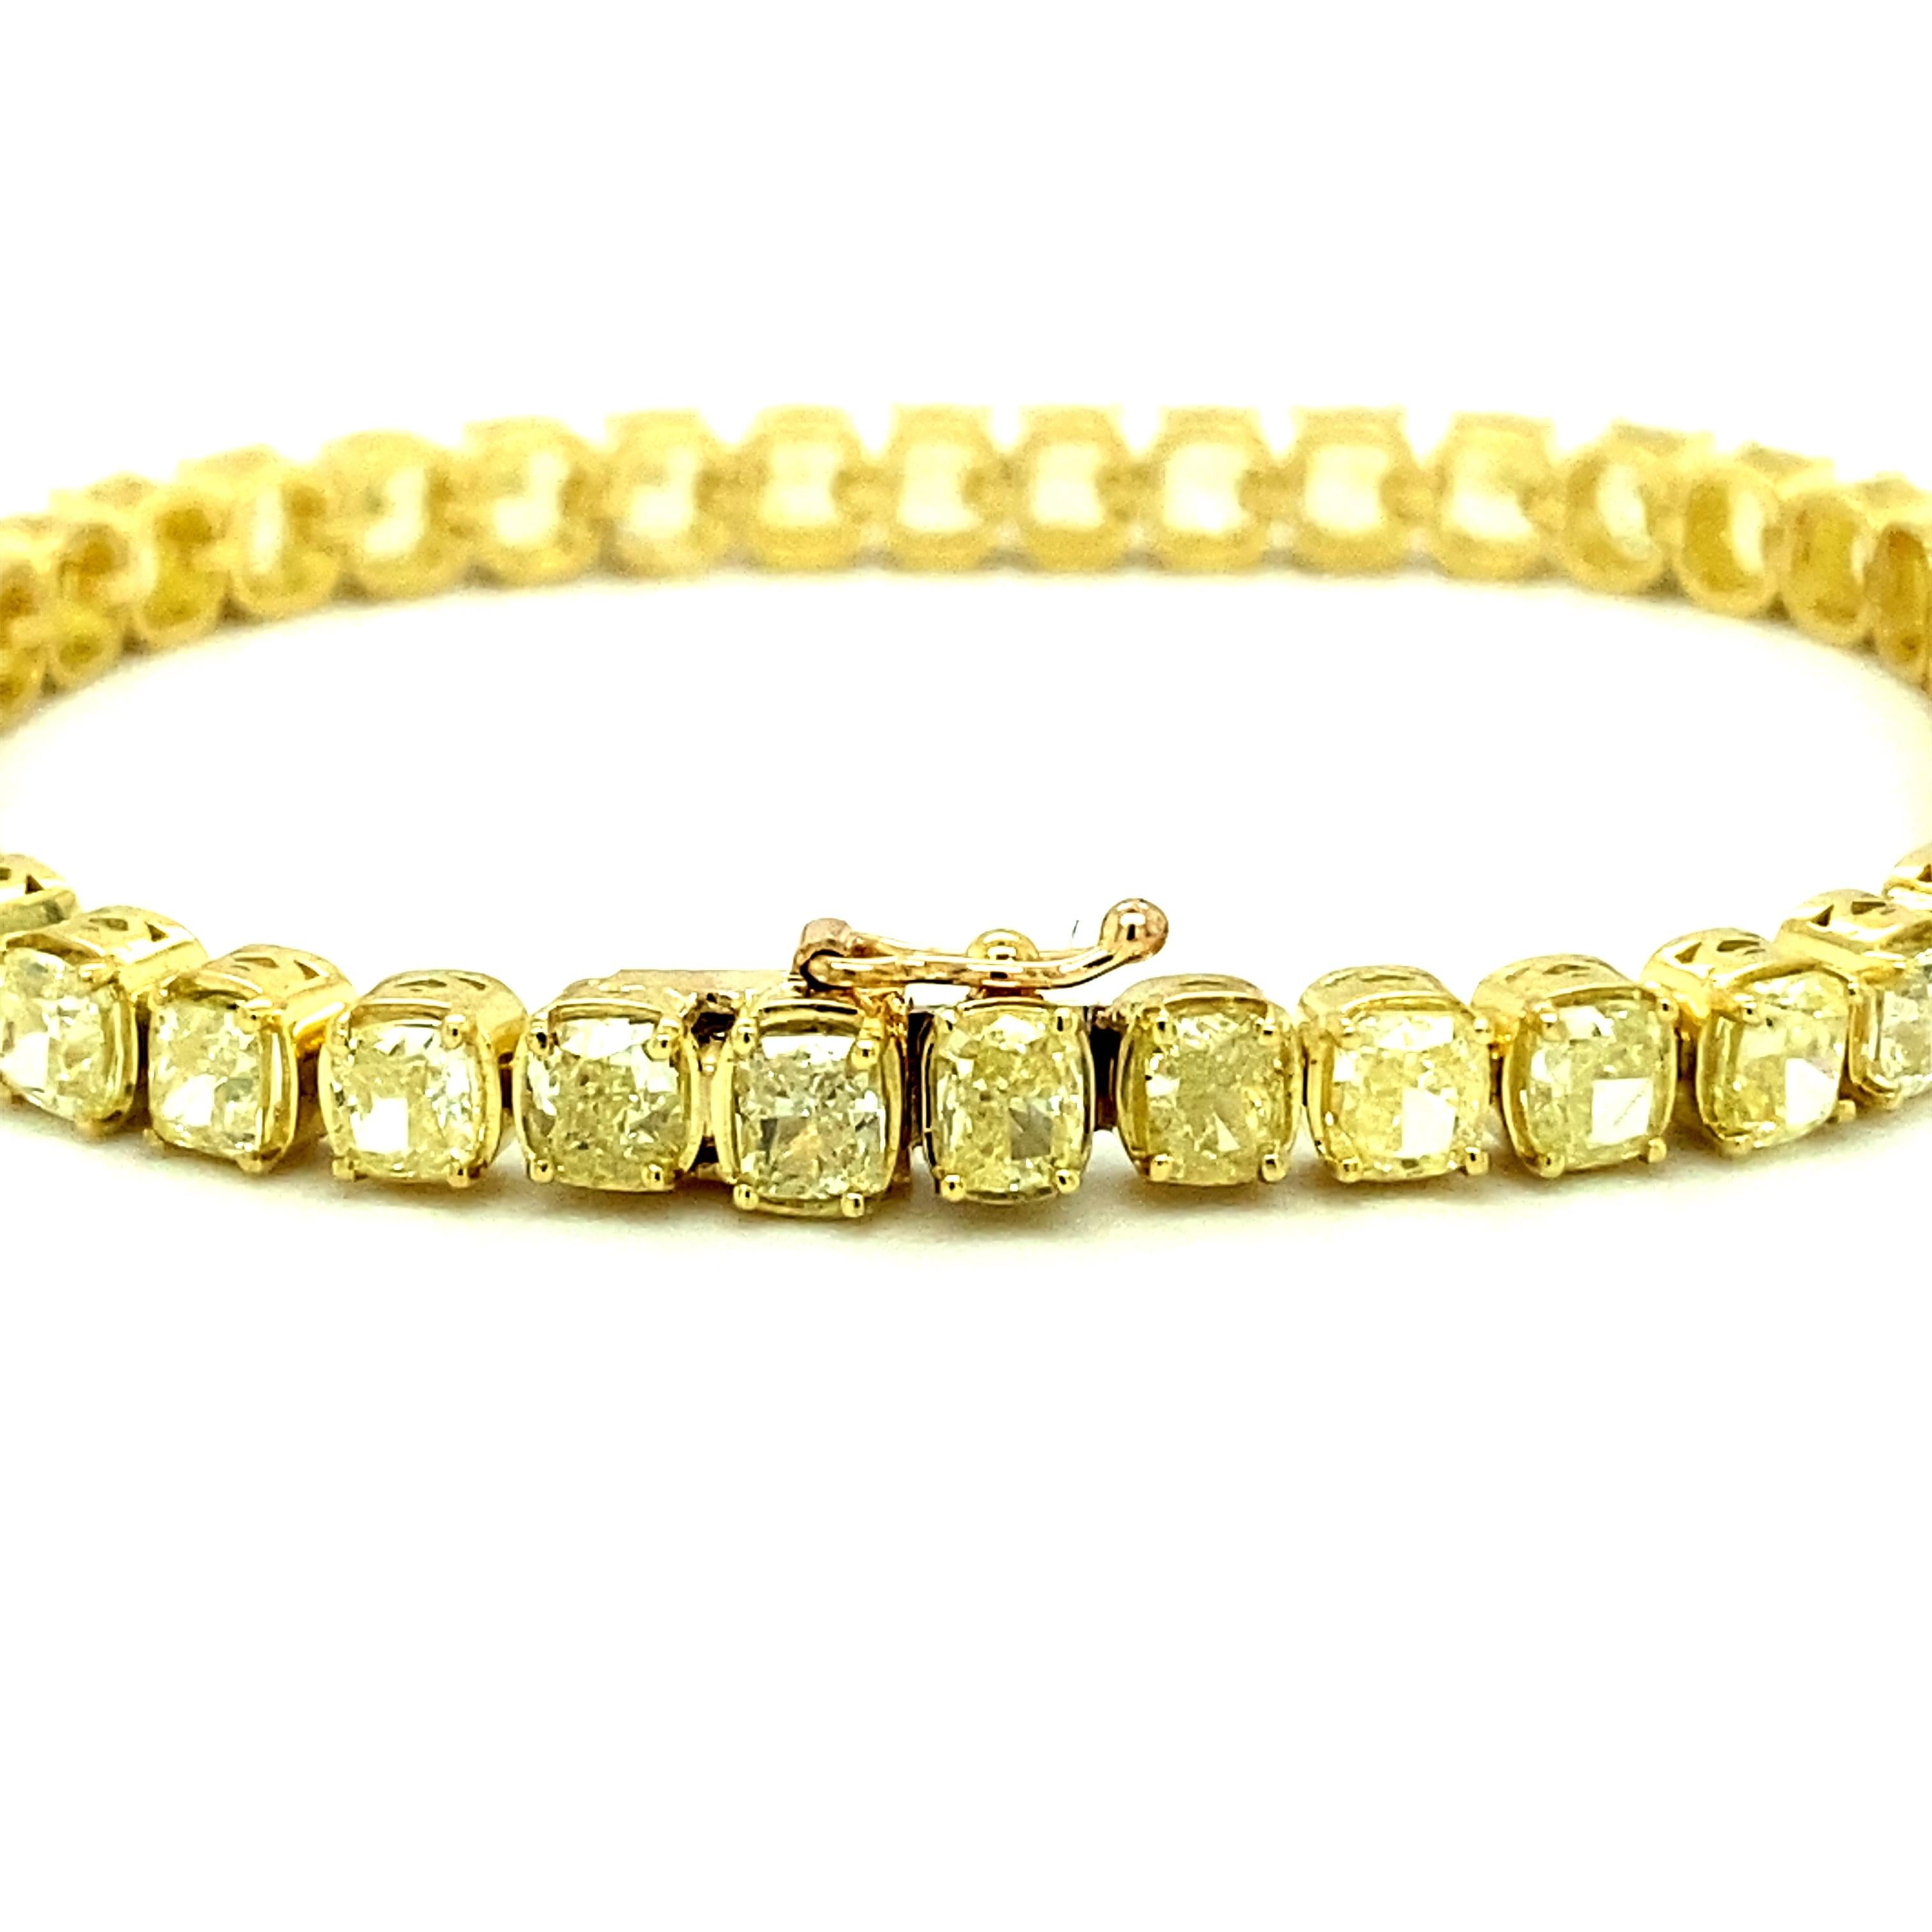 Offered here is a gorgeous Natural Yellow Diamond Tennis Bracelet in 18kt Yellow Gold. 
Diamond: 45 natural brilliant cut diamonds with an estimated total weight of 12.50 ct. Clarity is VS2-SI1. 
Weight: 20.20 gr. 
Length: 7 1/2 inches long & 4.65